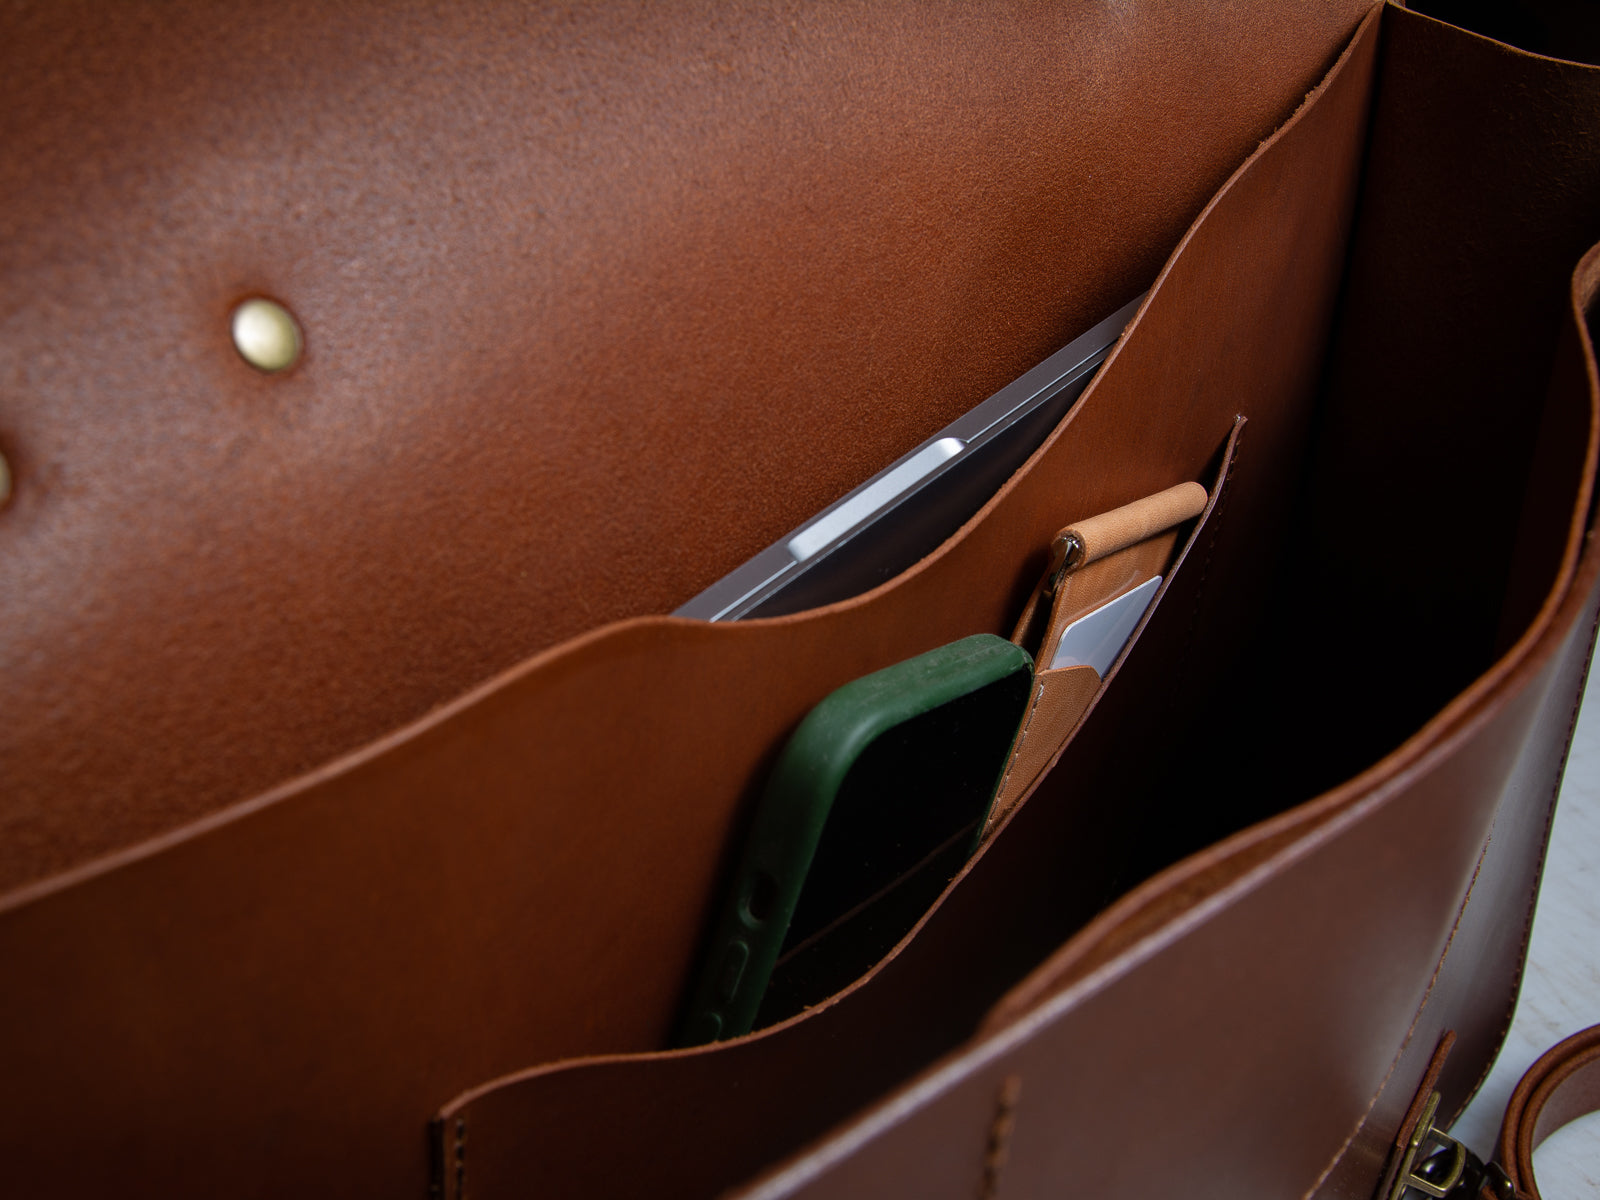 Close up inside view of the glengarry laptop bag in tan brown